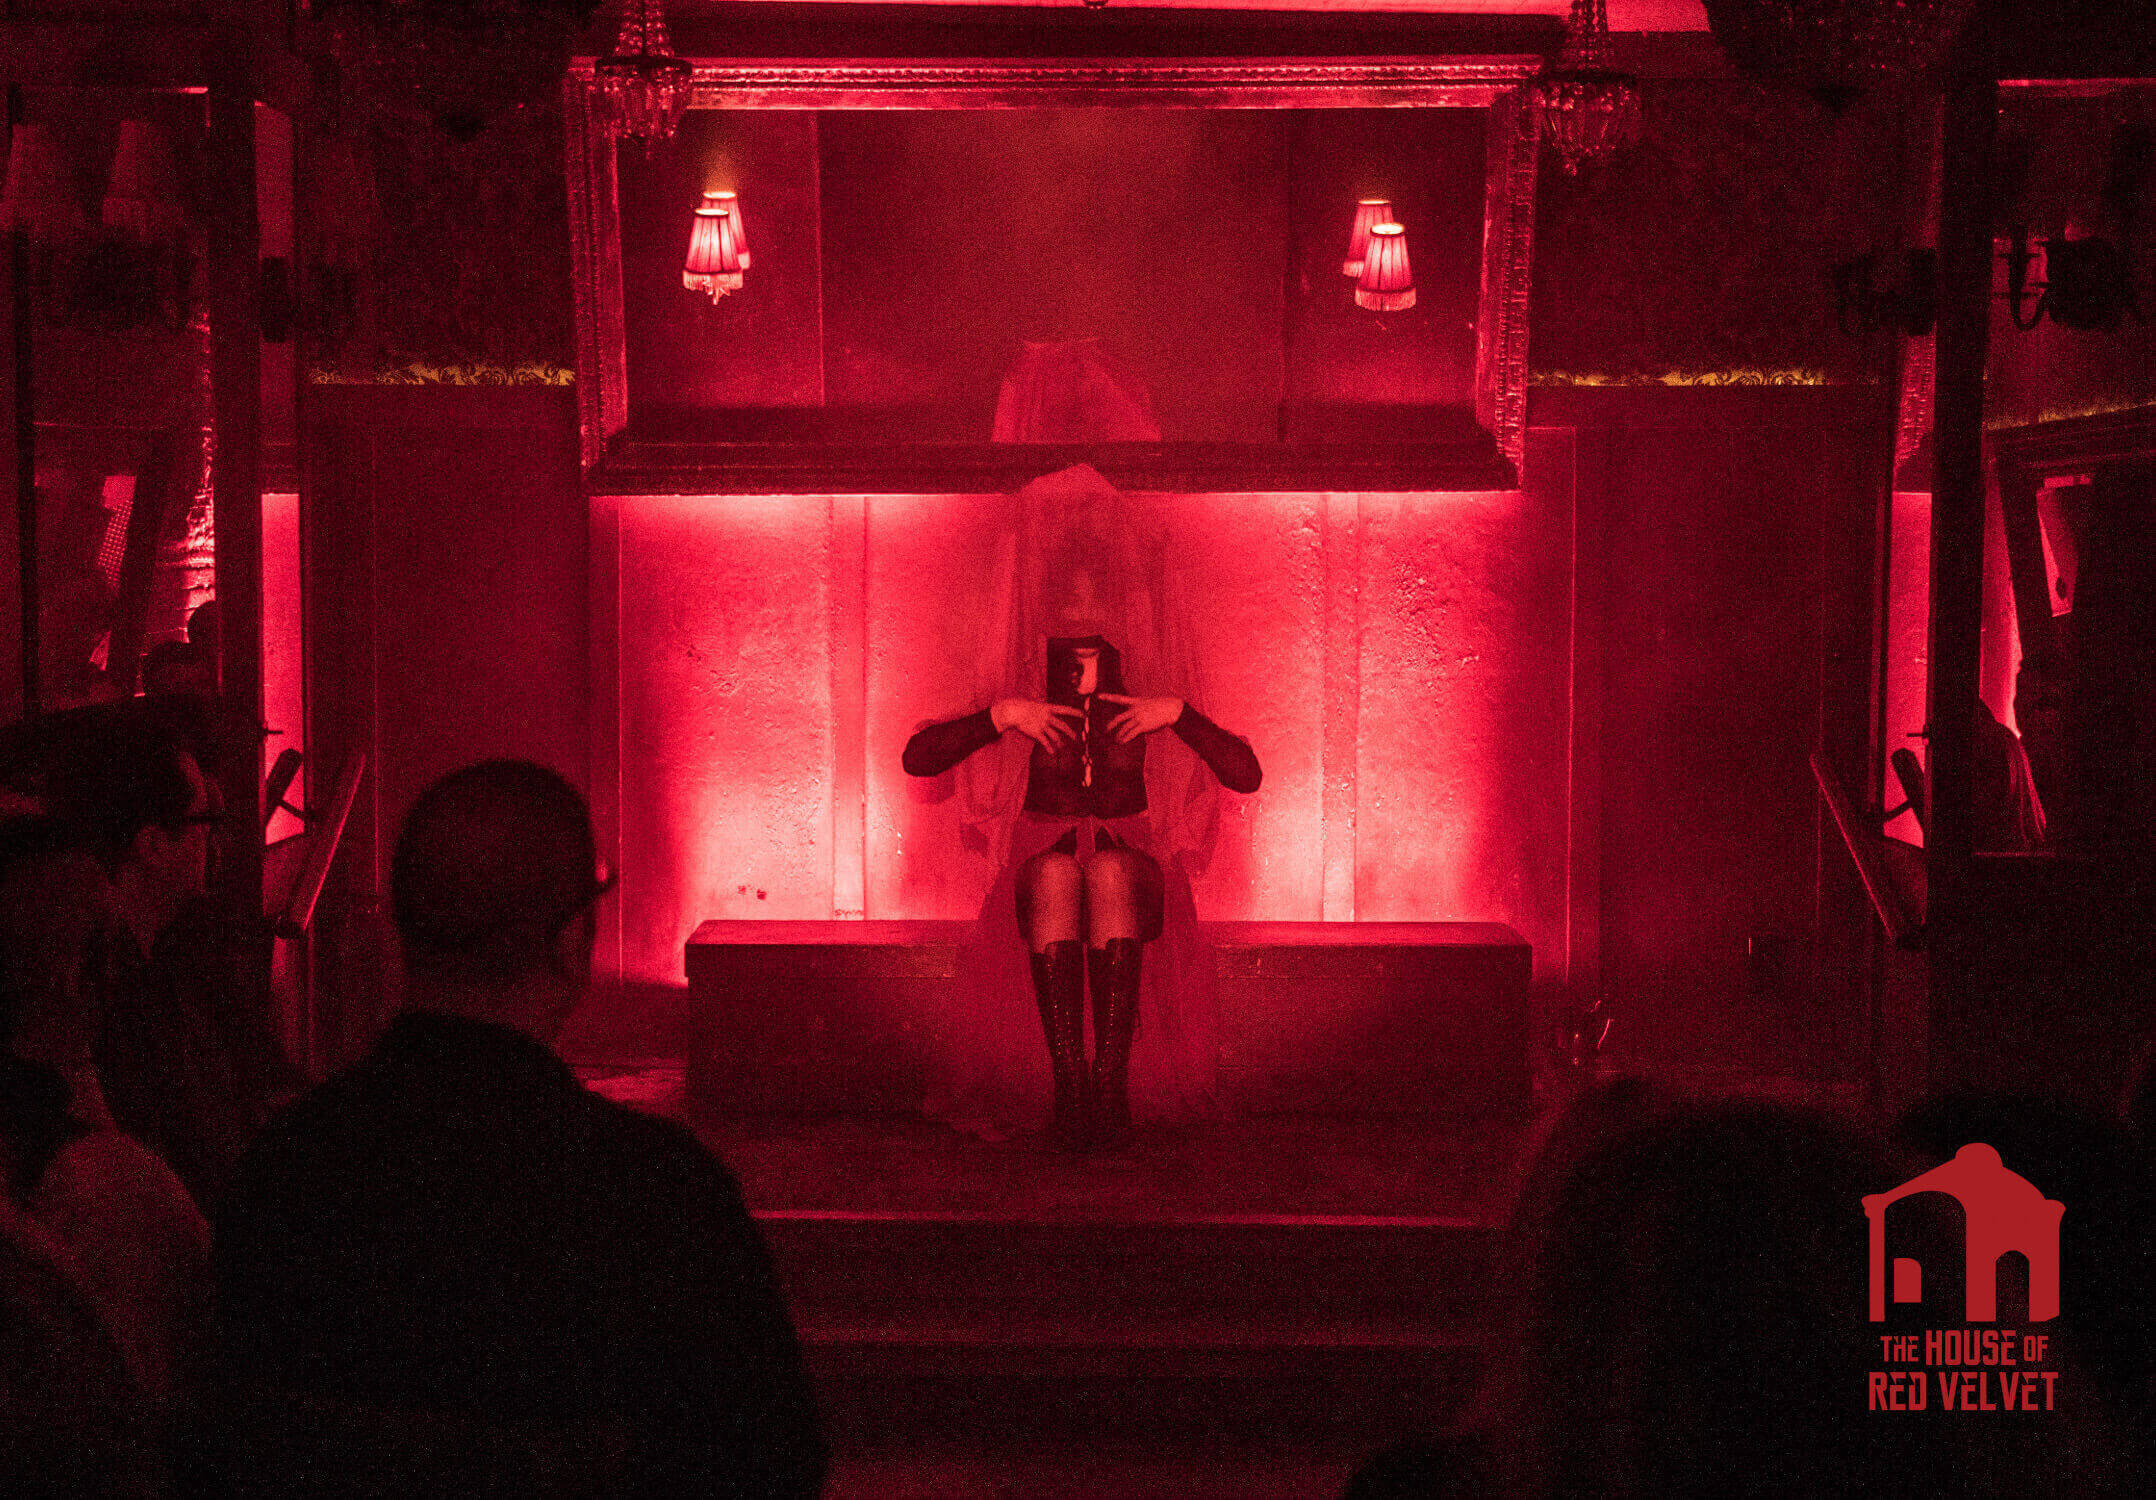  Los Angeles dark art and surrealistic performance theater. Conceptual, experimental and immersive theatrical movement creating experiences for the avant-garde heart.  